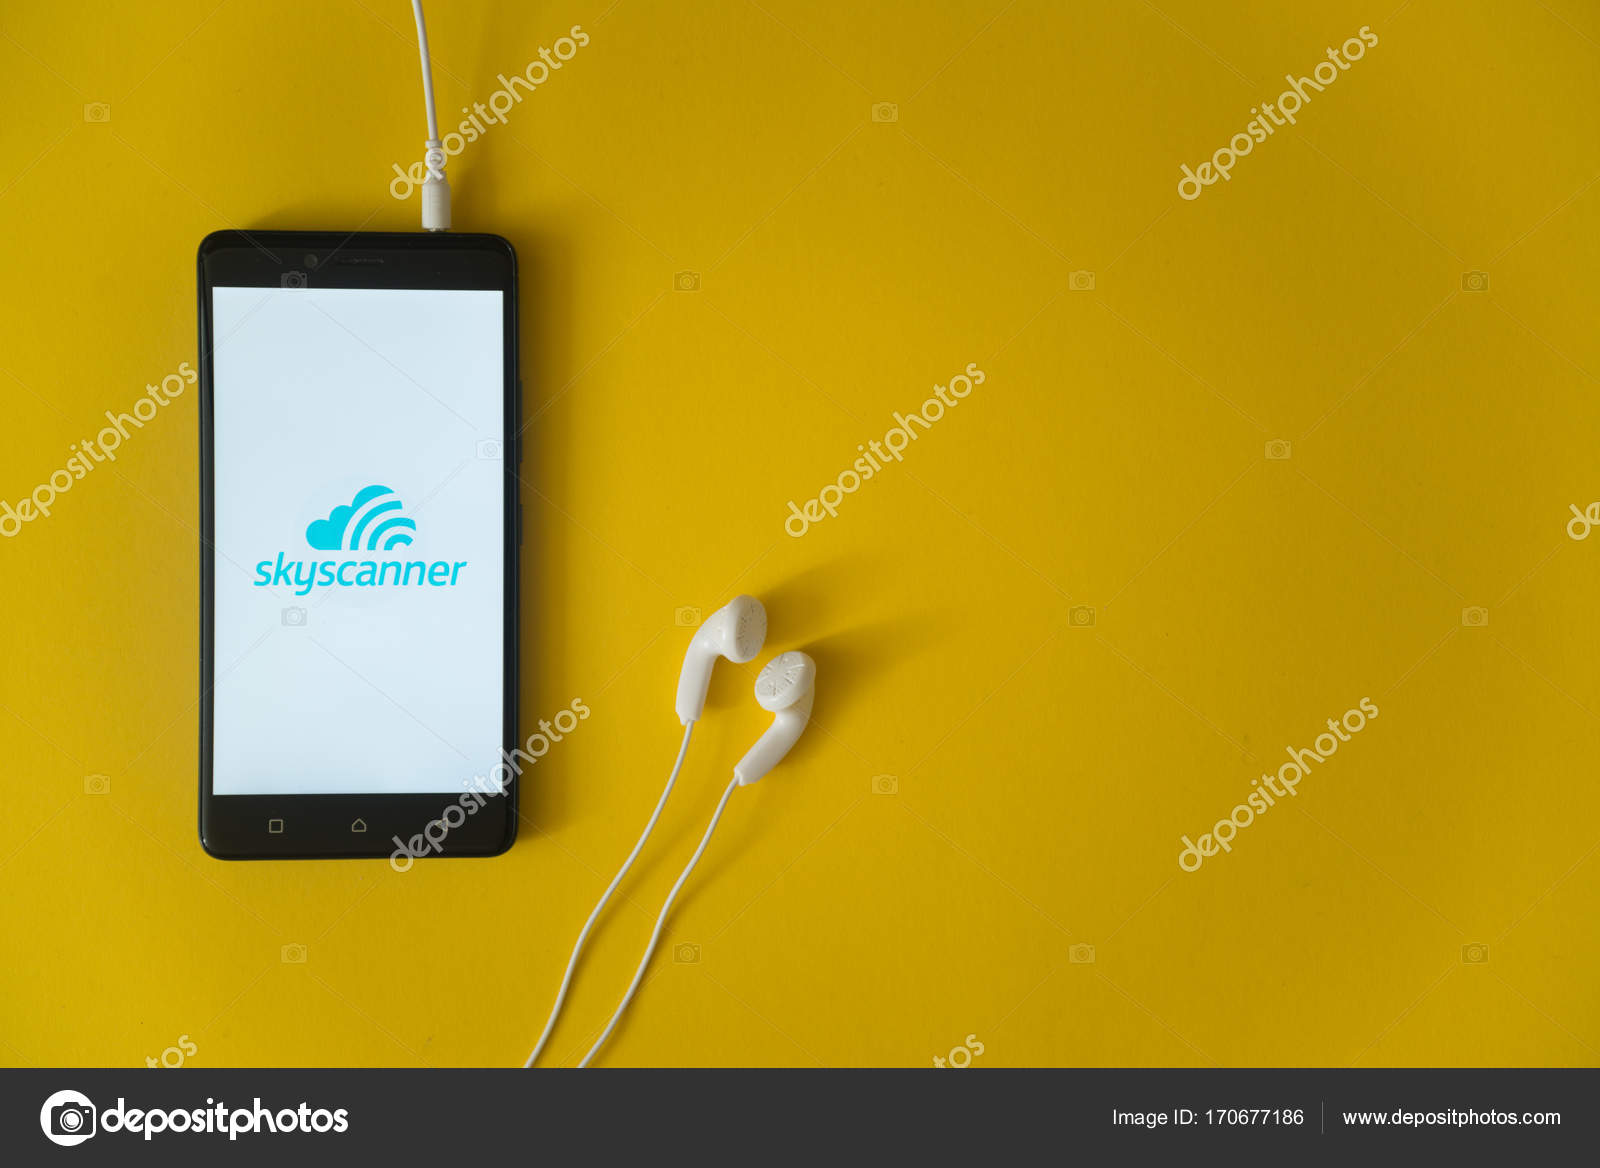 Skyscanner Logo On Smartphone Screen On Yellow Background Stock Editorial Photo C Pe3check